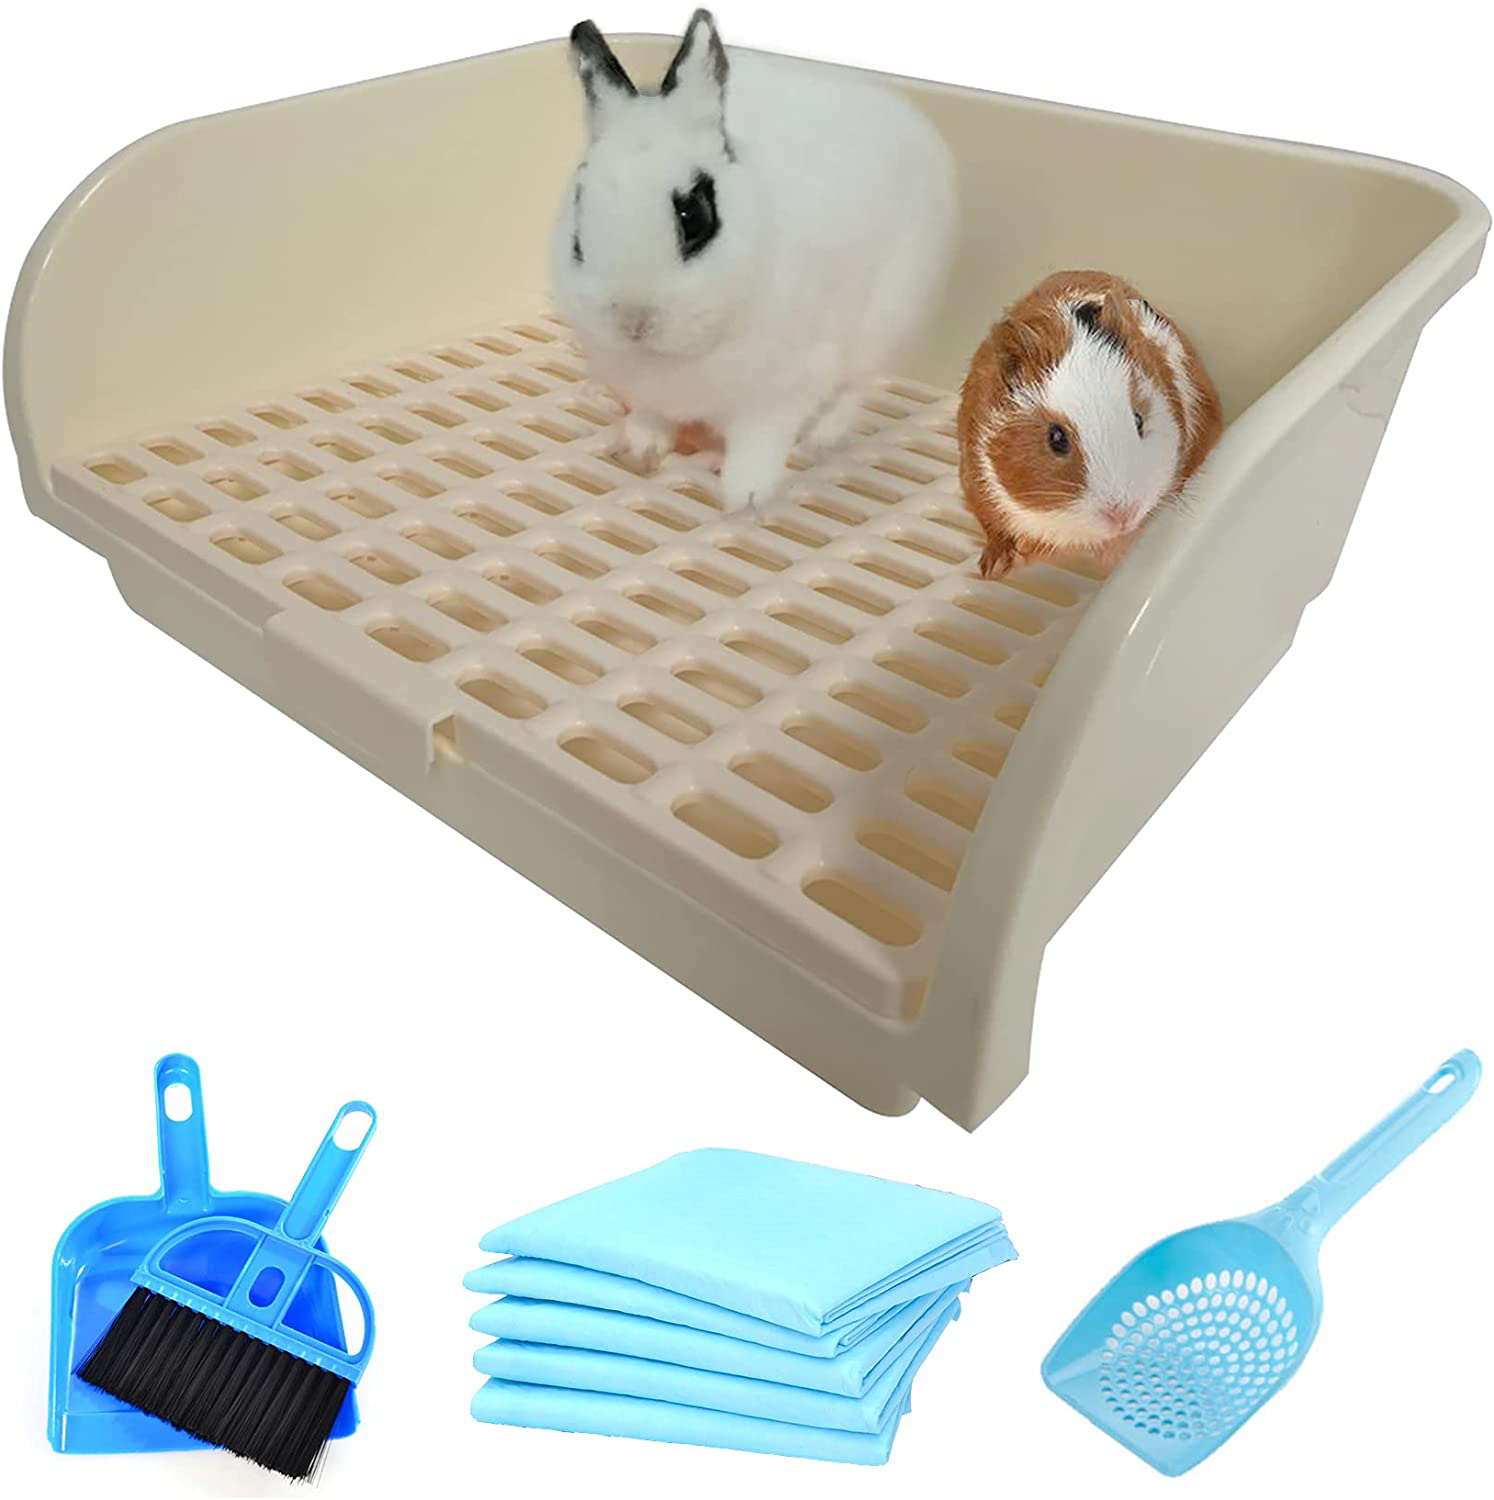 Hamiledyi Large Rabbit Litter Box Corner Bedding Box Chinchilla Toilet Trainer Square Potty Pet Pan for Adult Guinea Pig, Galesaur.Ferret and Other Animals